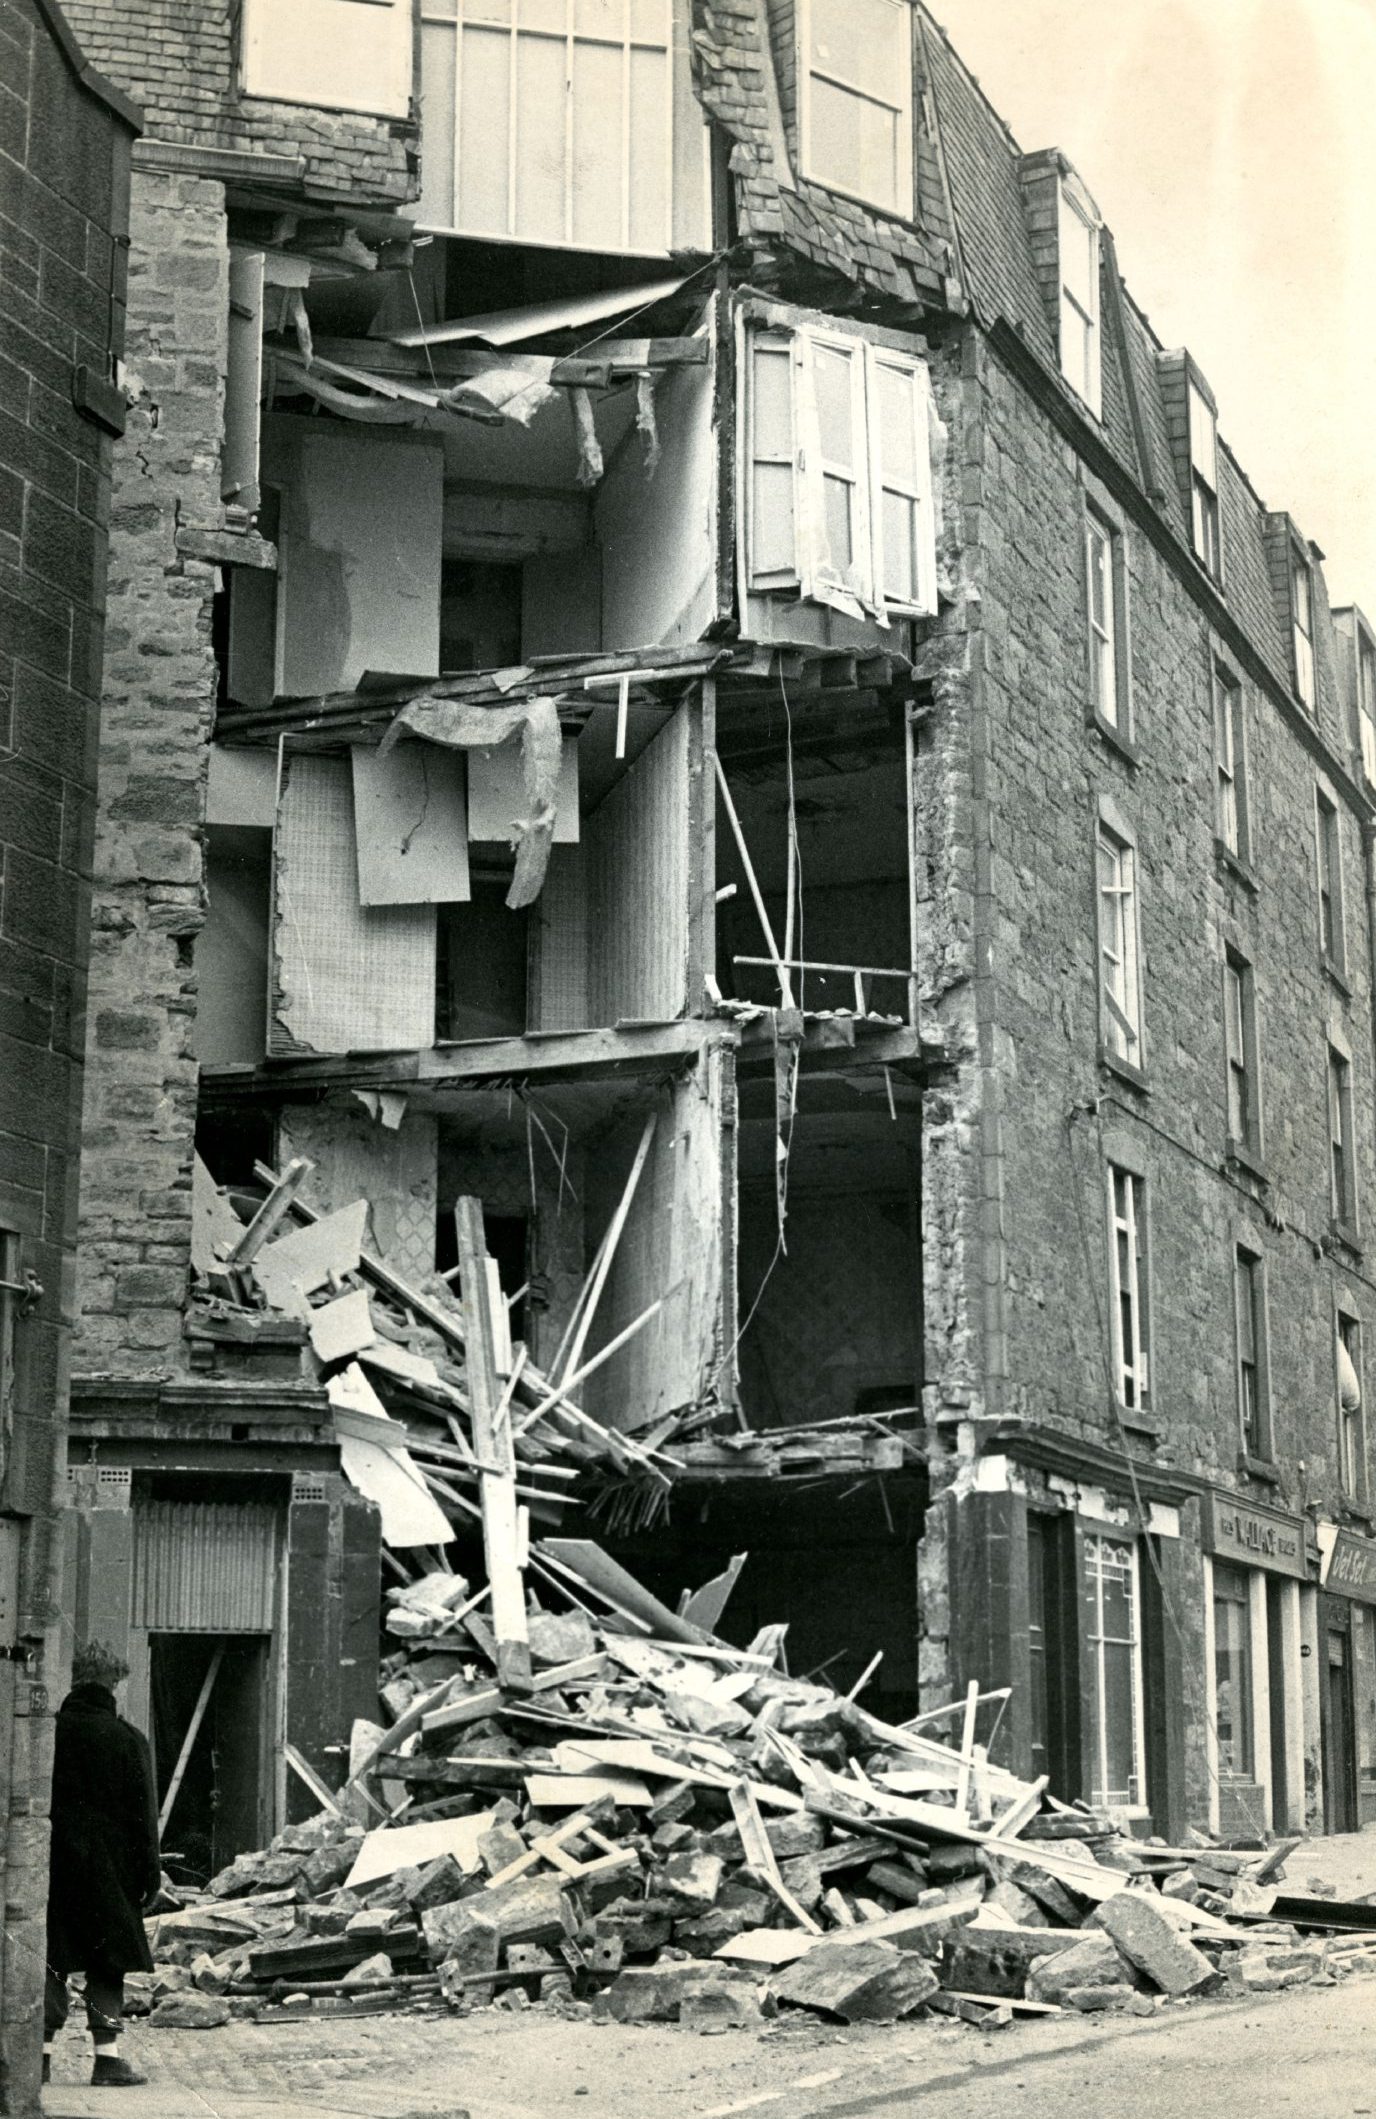 A man looks on after the tenement collapse on Blackness Road in Dundee in 1984